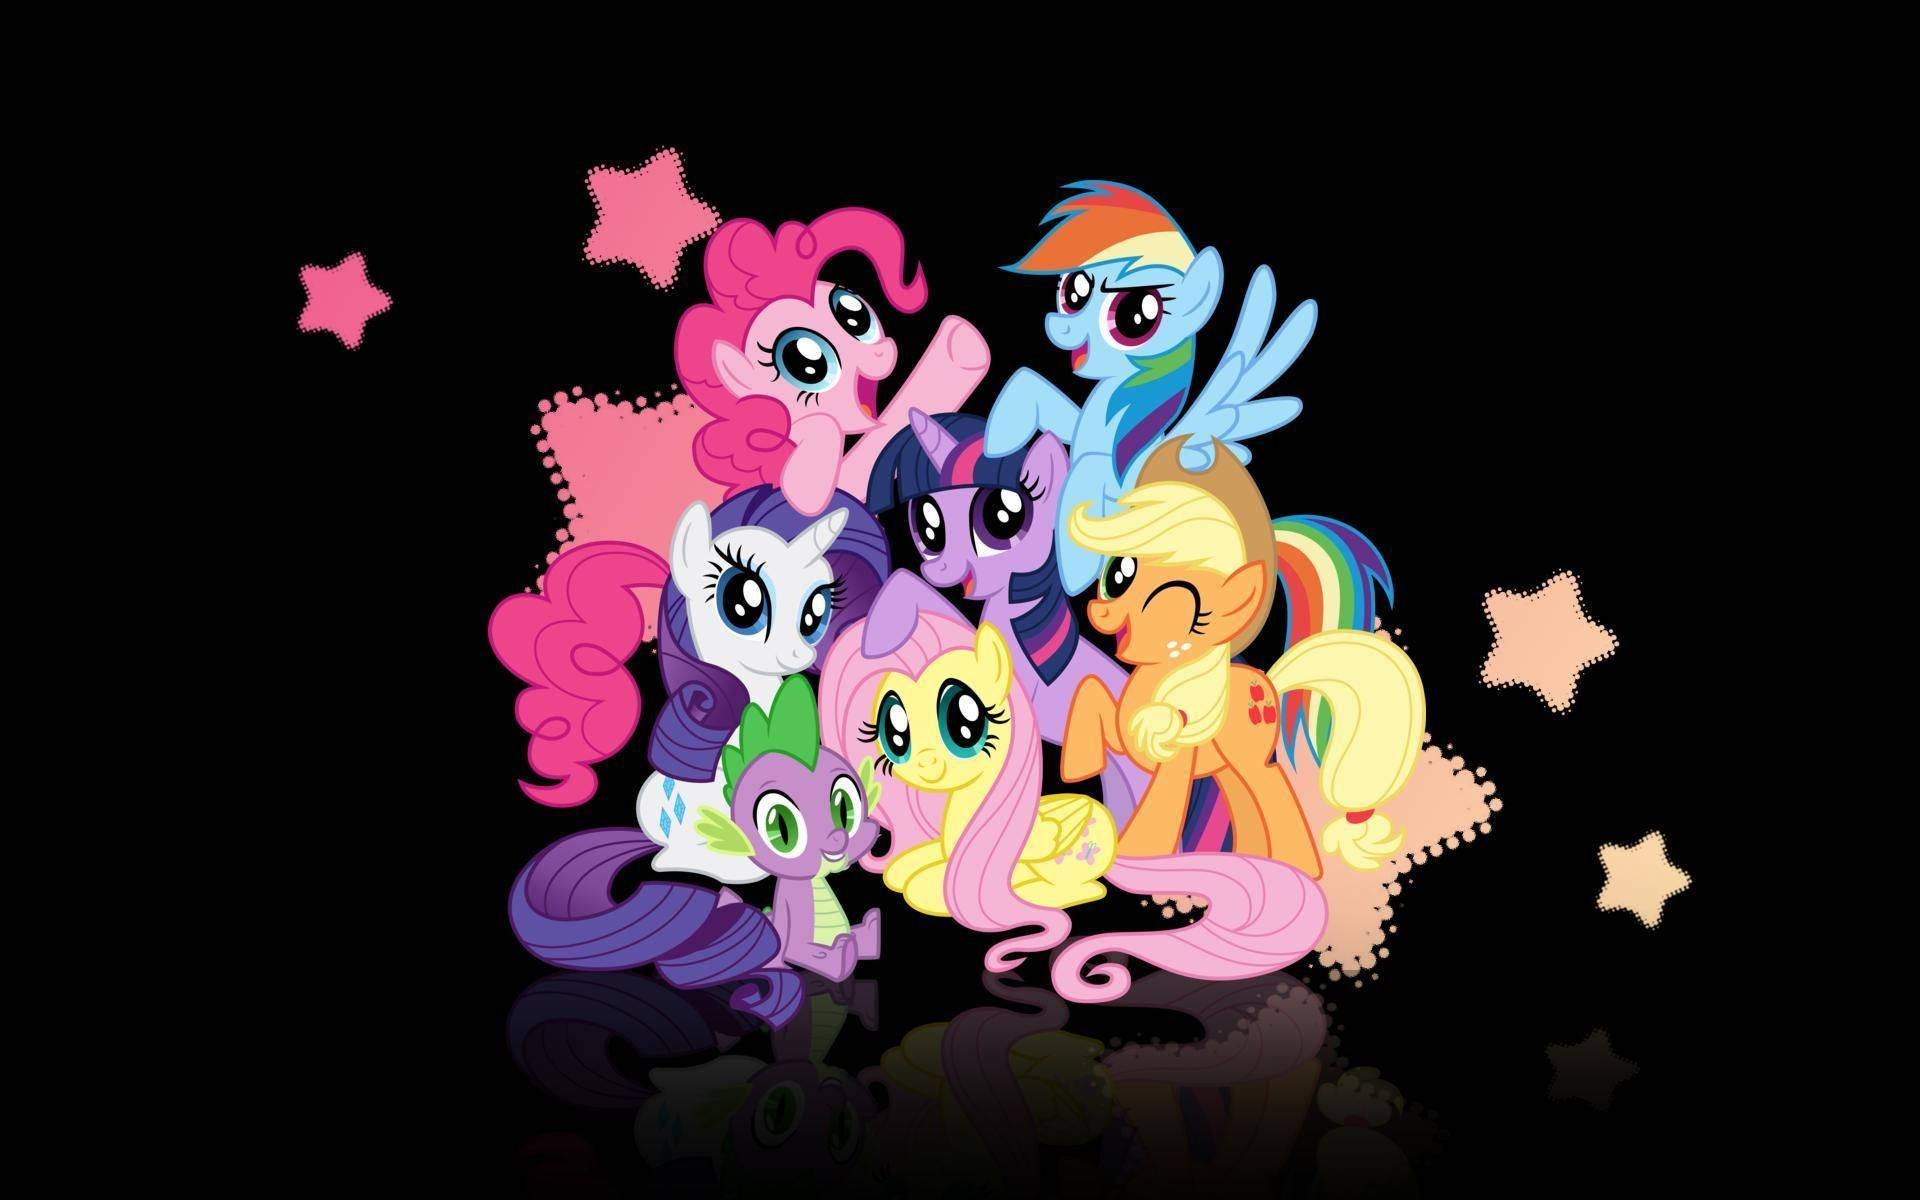 The Cutest My Little Pony Desktop For Your Home